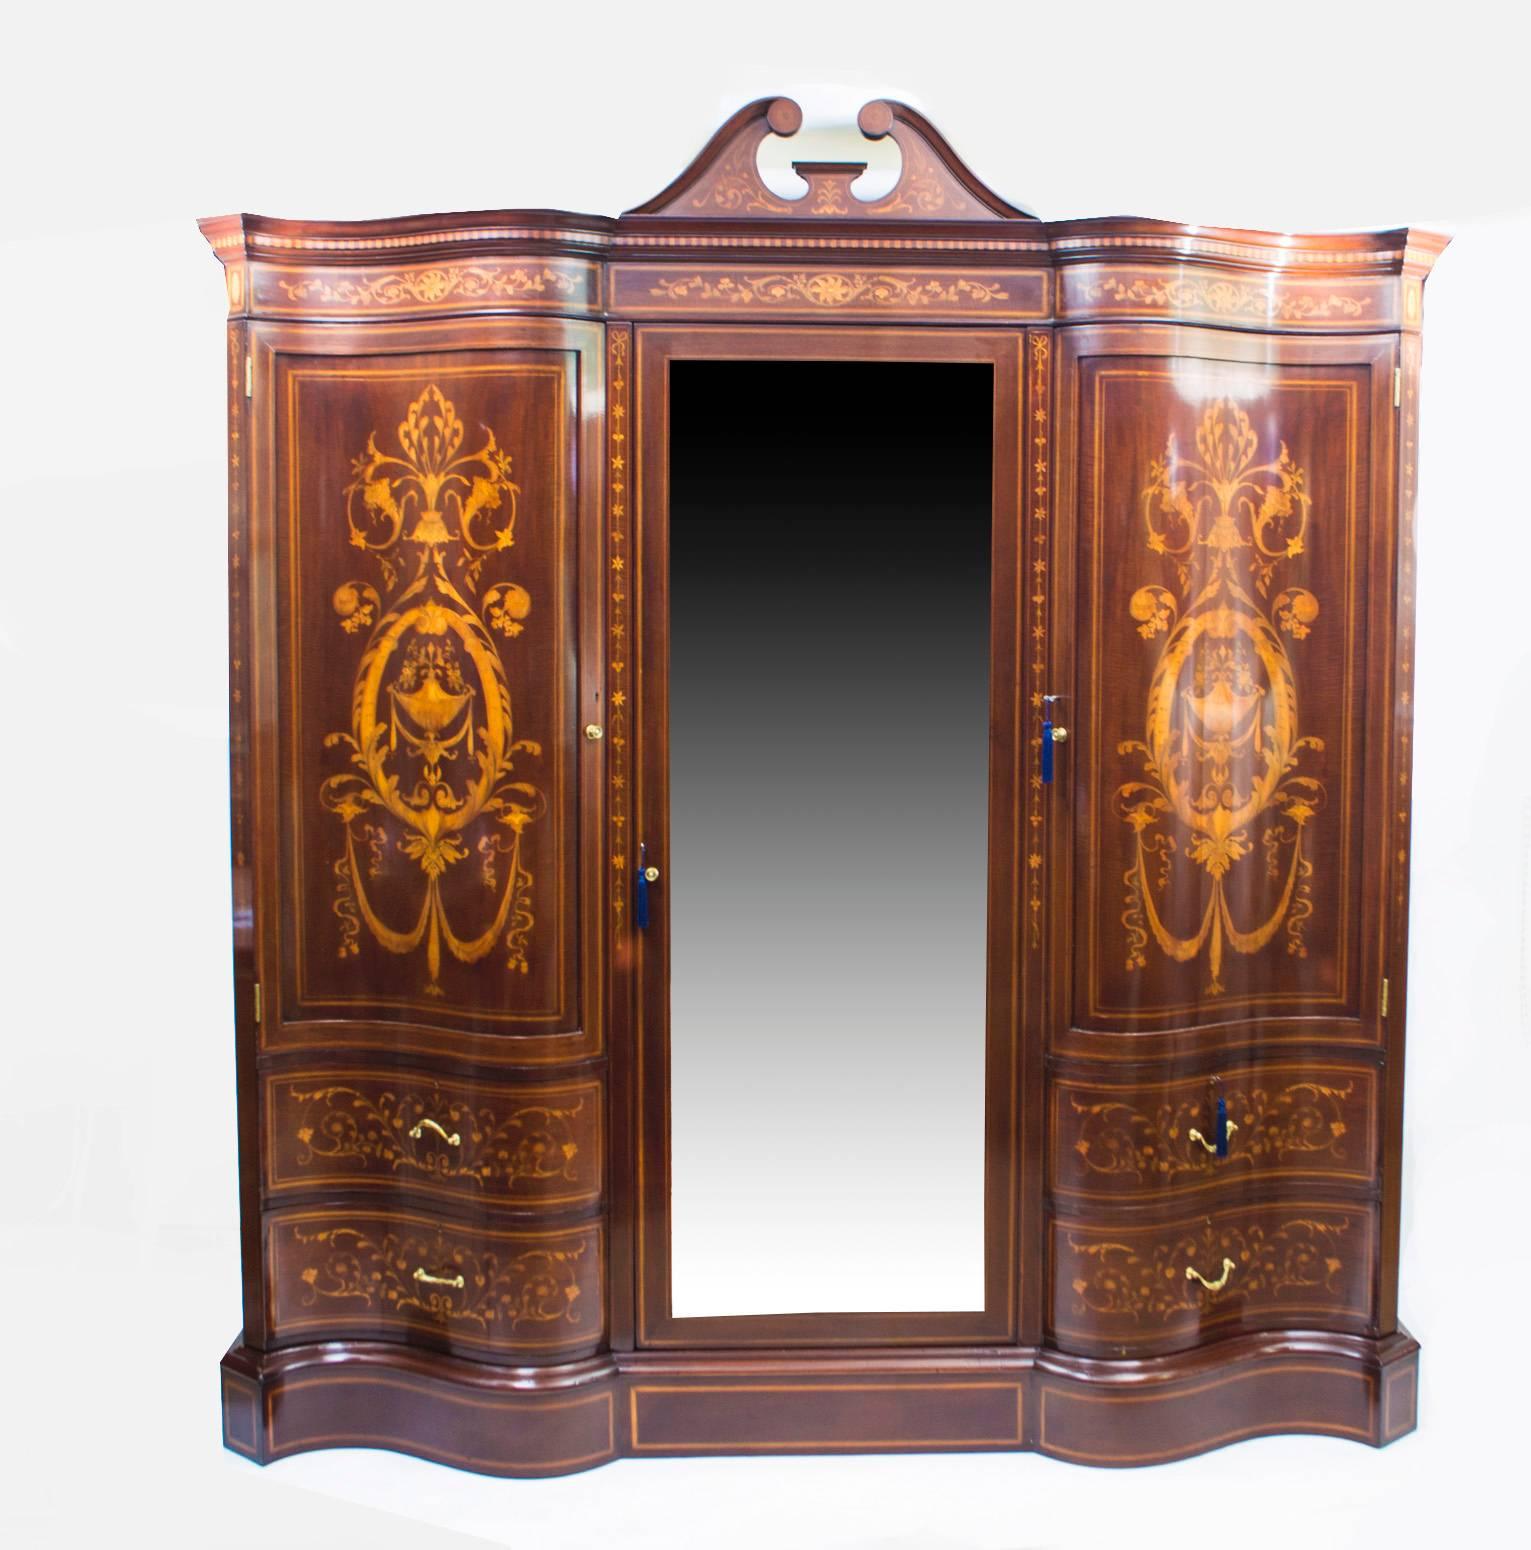 This is a spectacular antique late Victorian mahogany and floral marquetry bedroom suite comprising, a serpentine shaped wardrobe and a dressing table by the renowned cabinet maker and retailer Edwards & Roberts, circa 1880 in date.

Each piece is